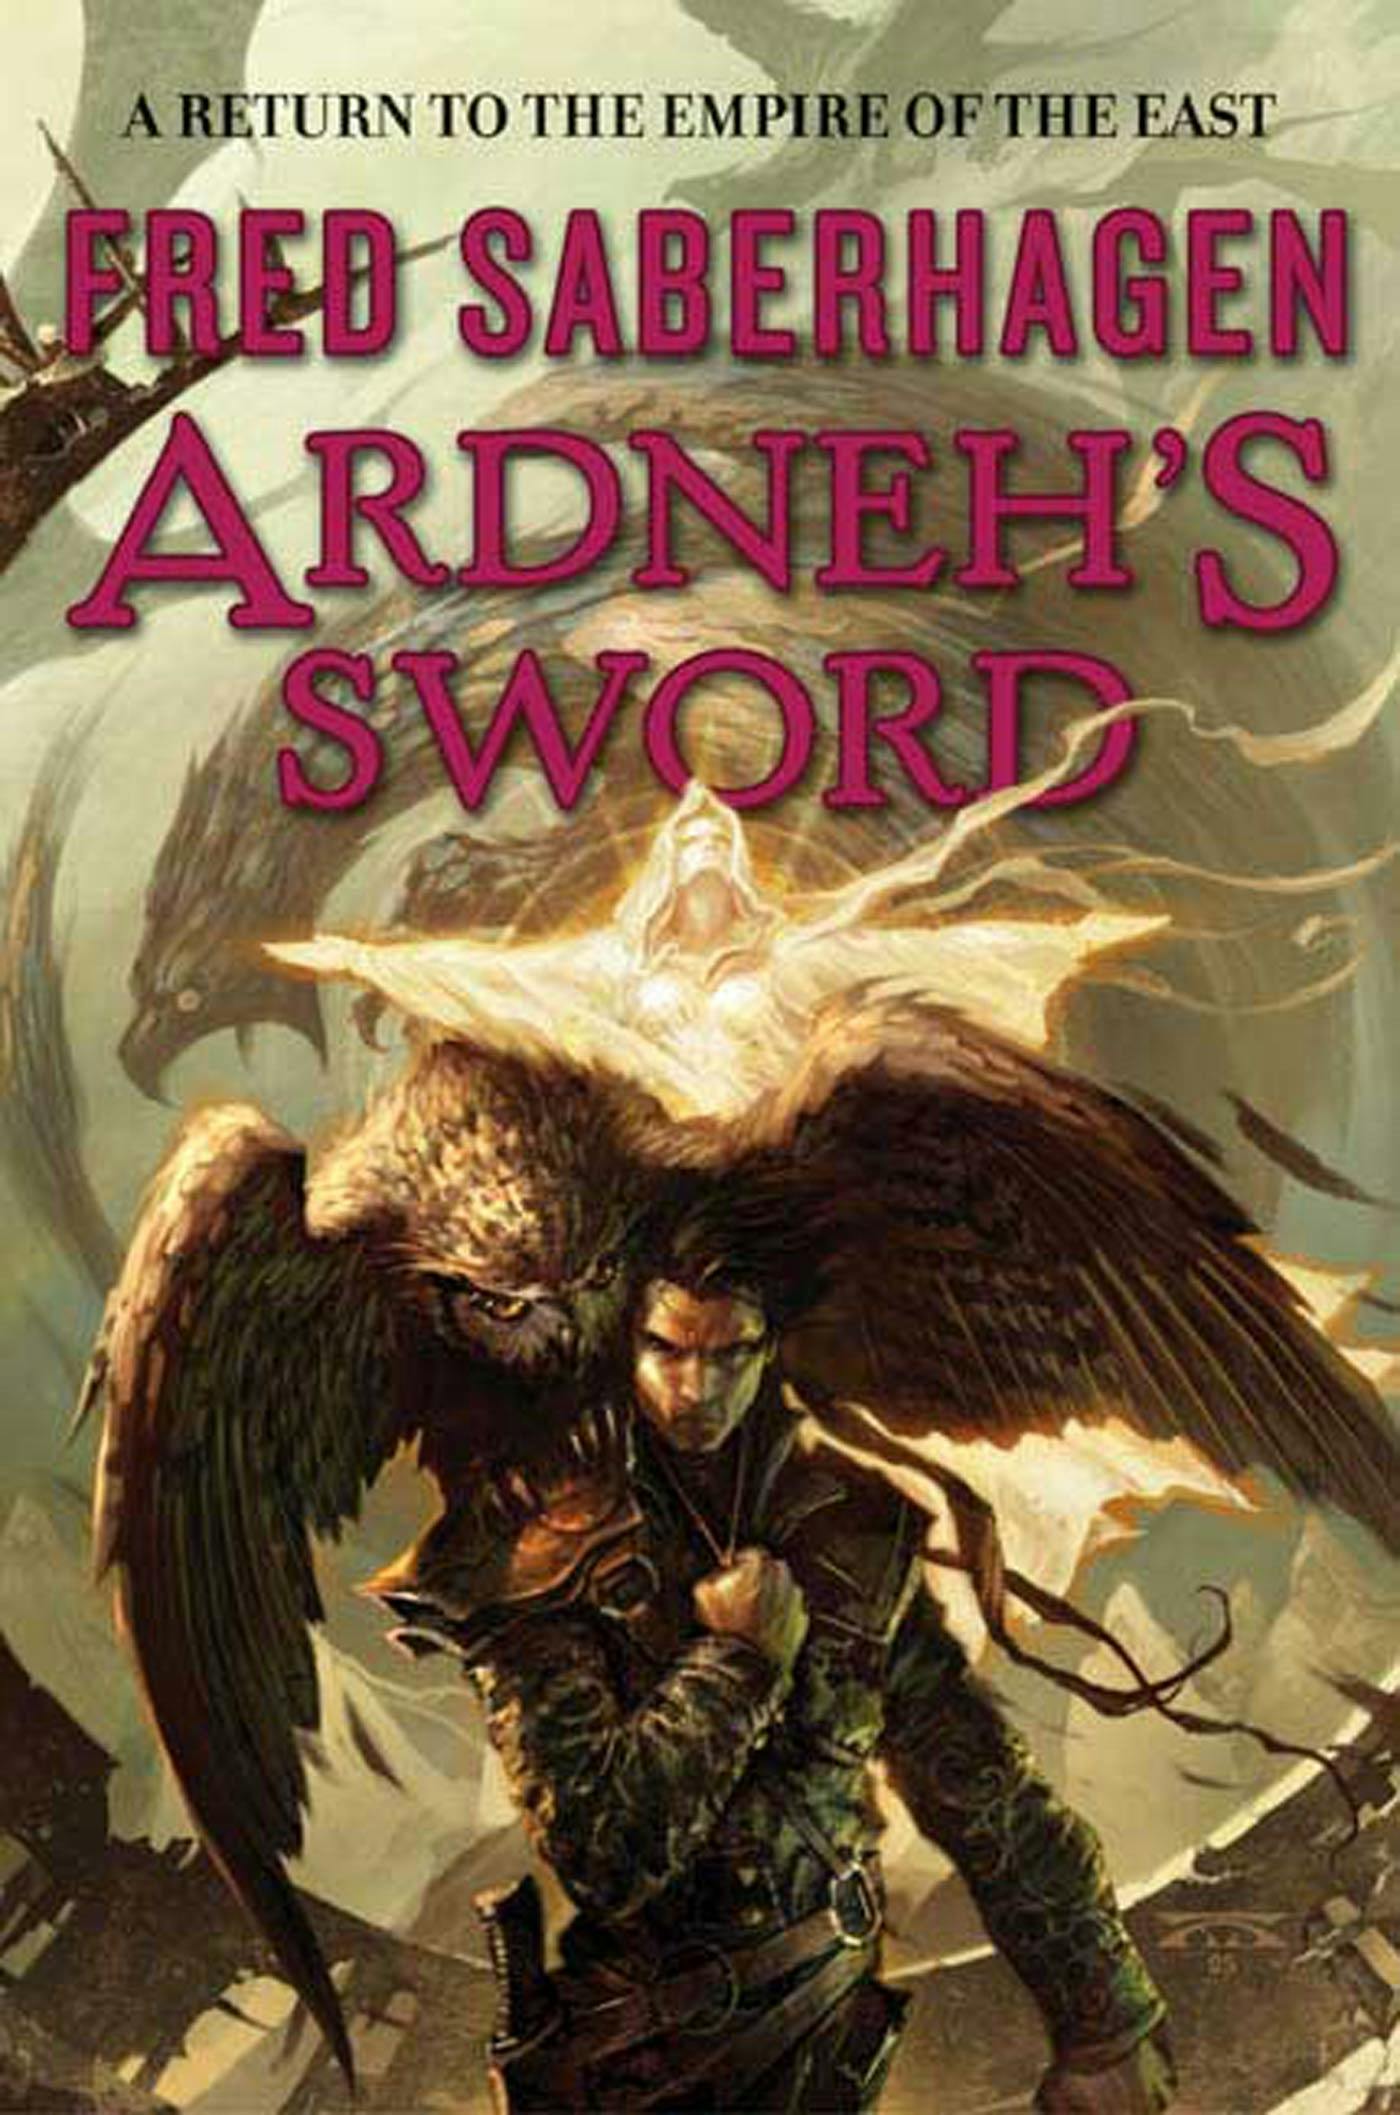 Cover for the book titled as: Ardneh's Sword